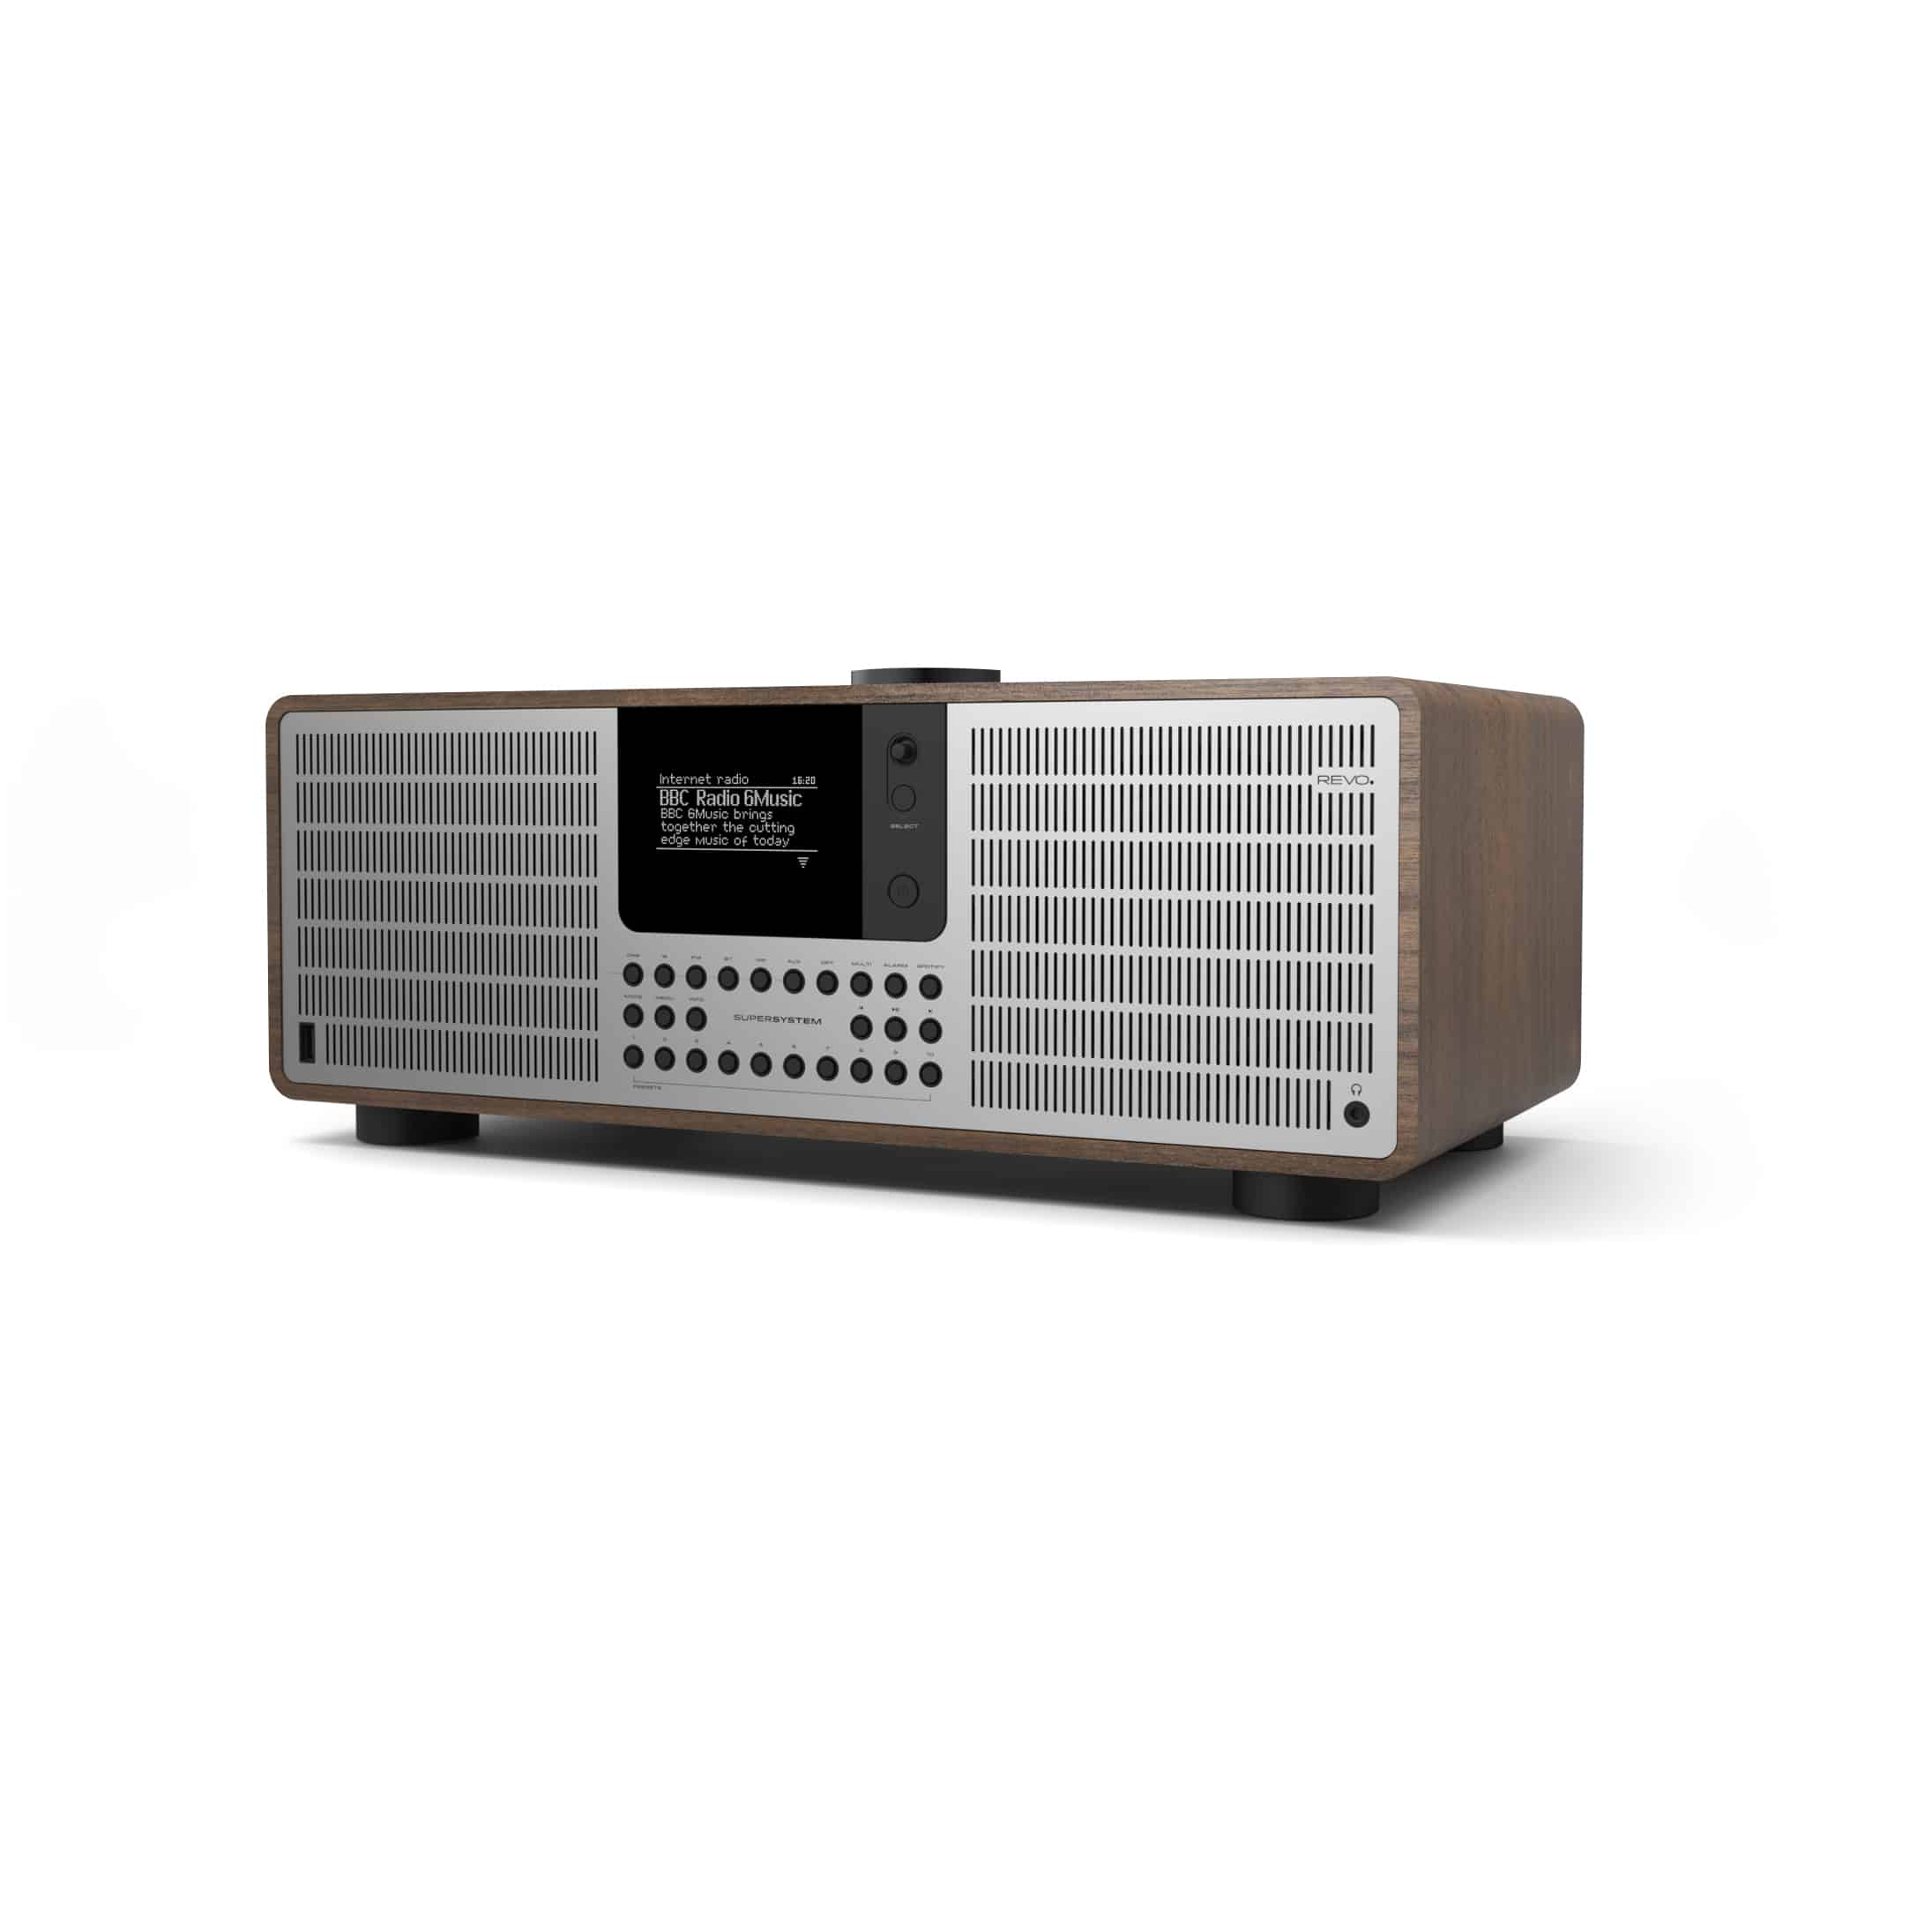 klap Windswept Encommium REVO SuperSystem - The Traditional Home Stereo System